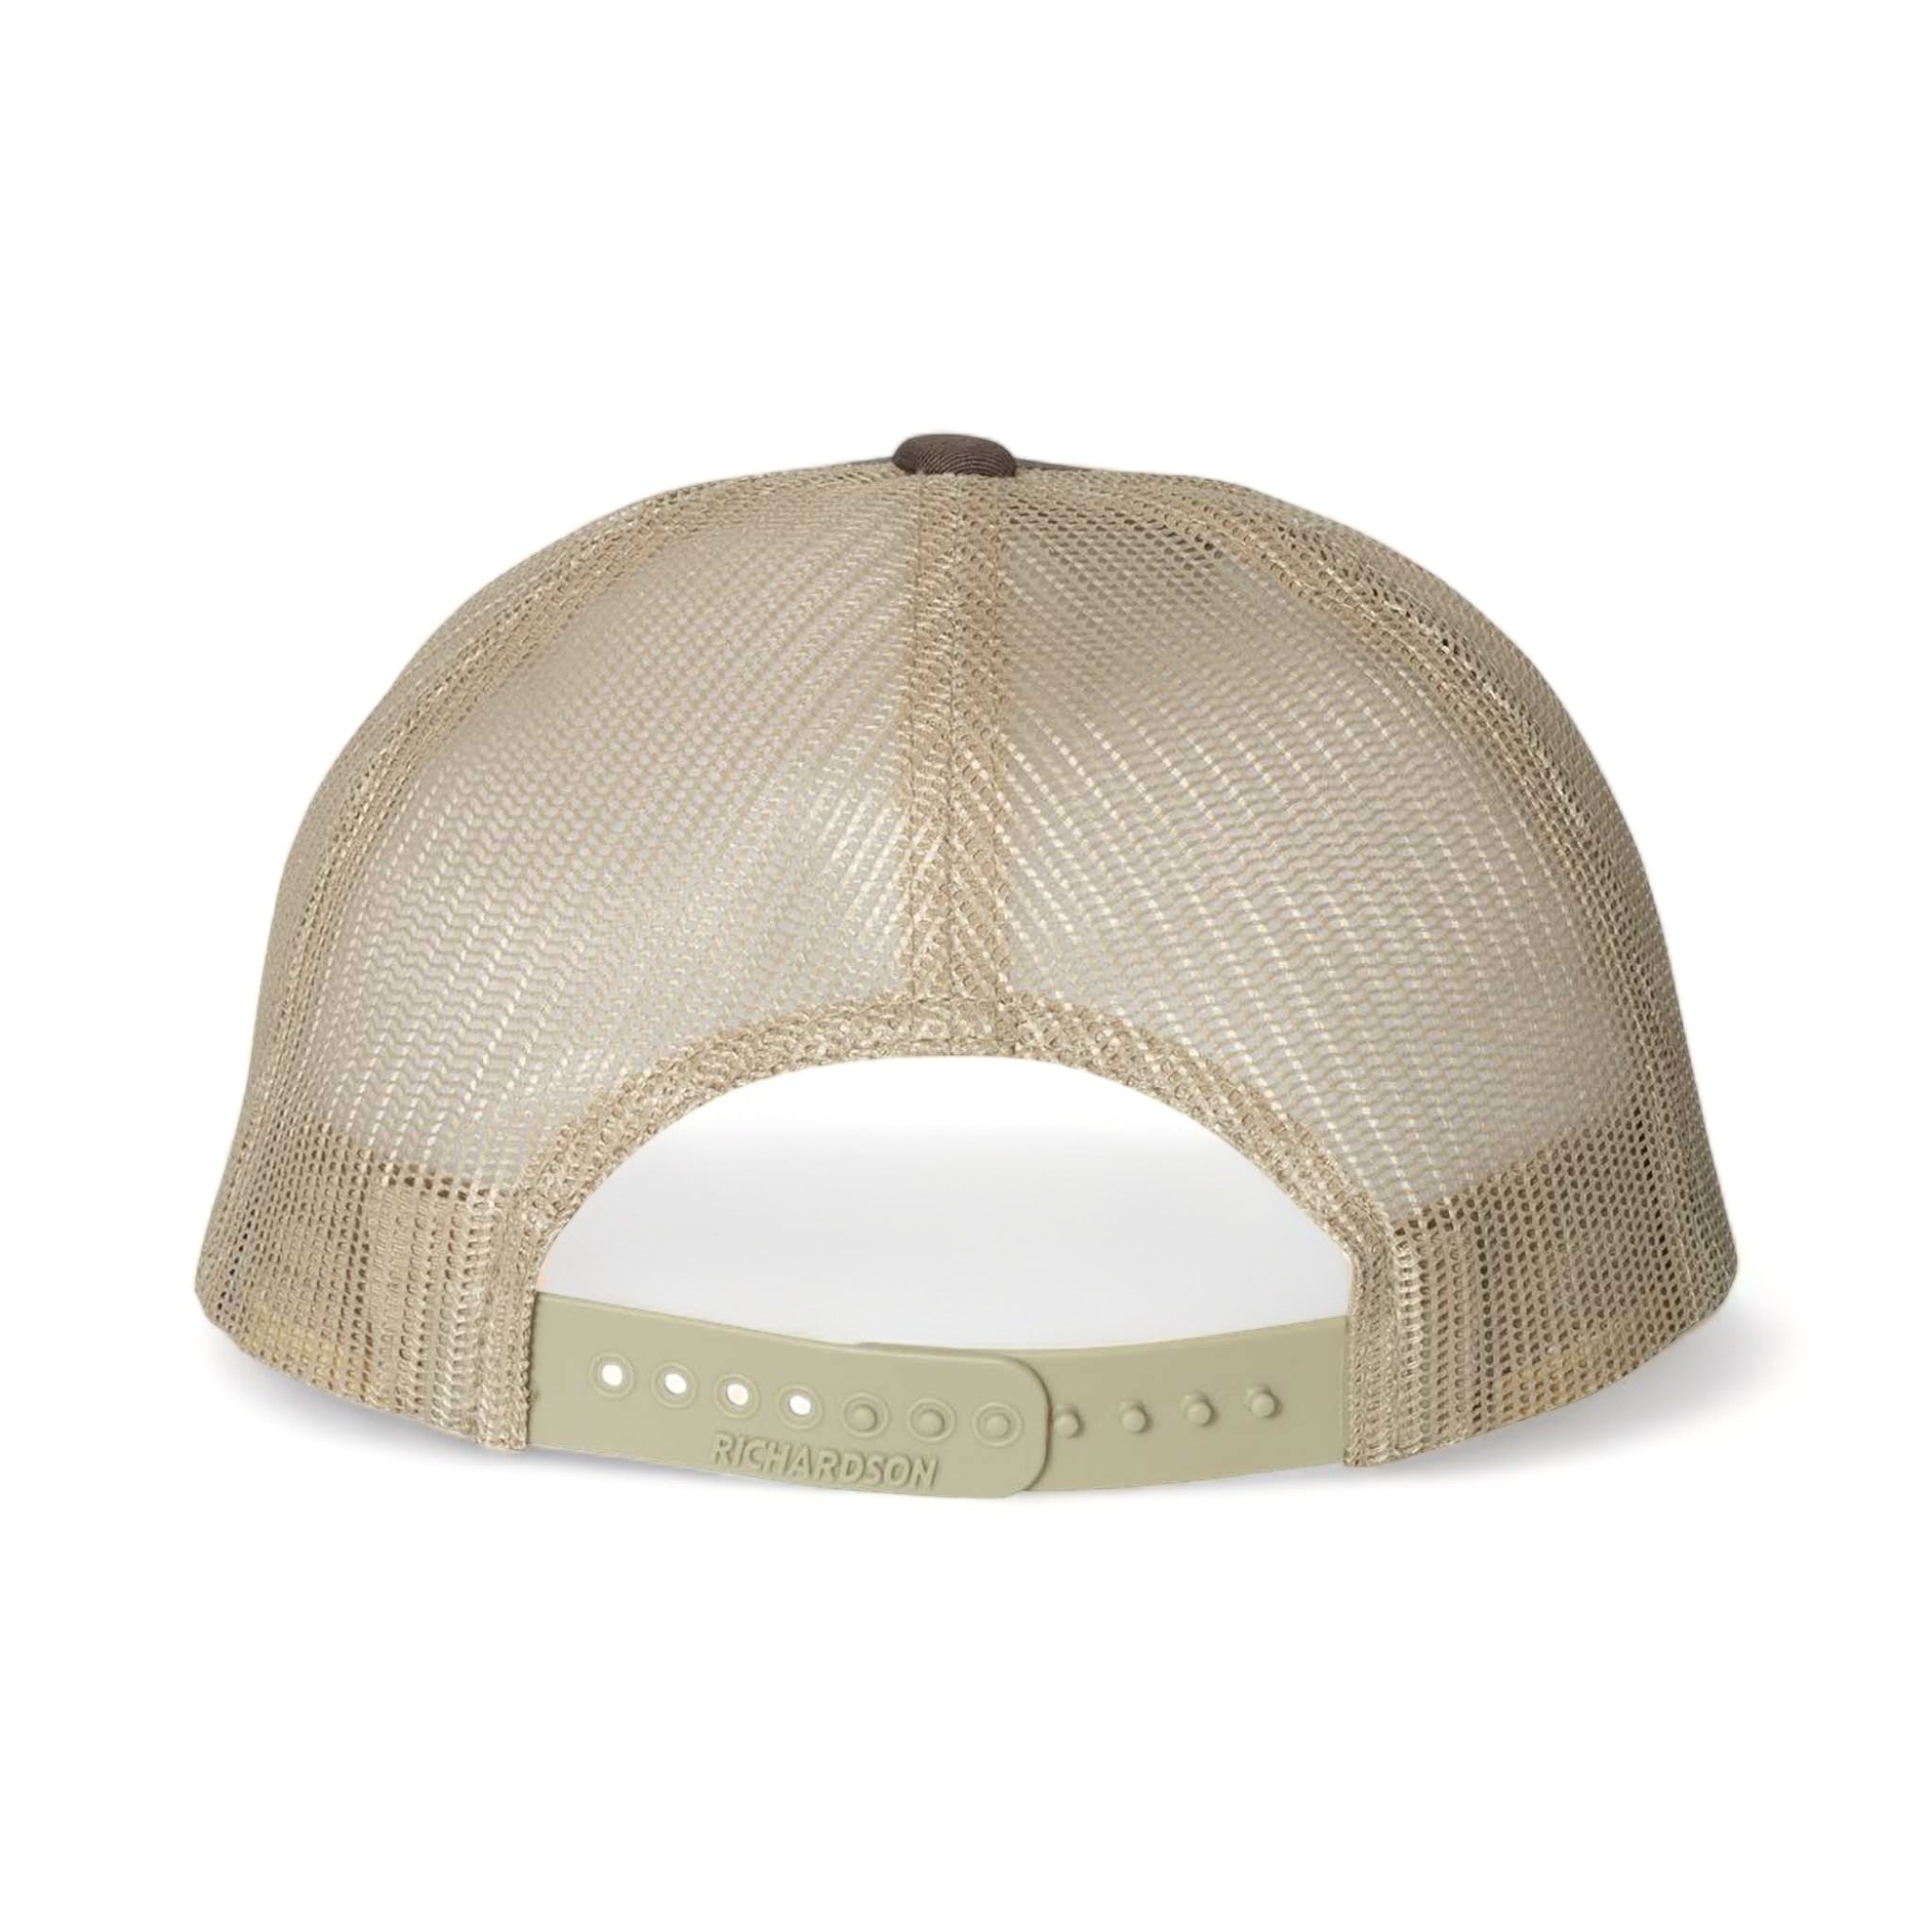 Back view of Richardson 115 custom hat in brown and khaki